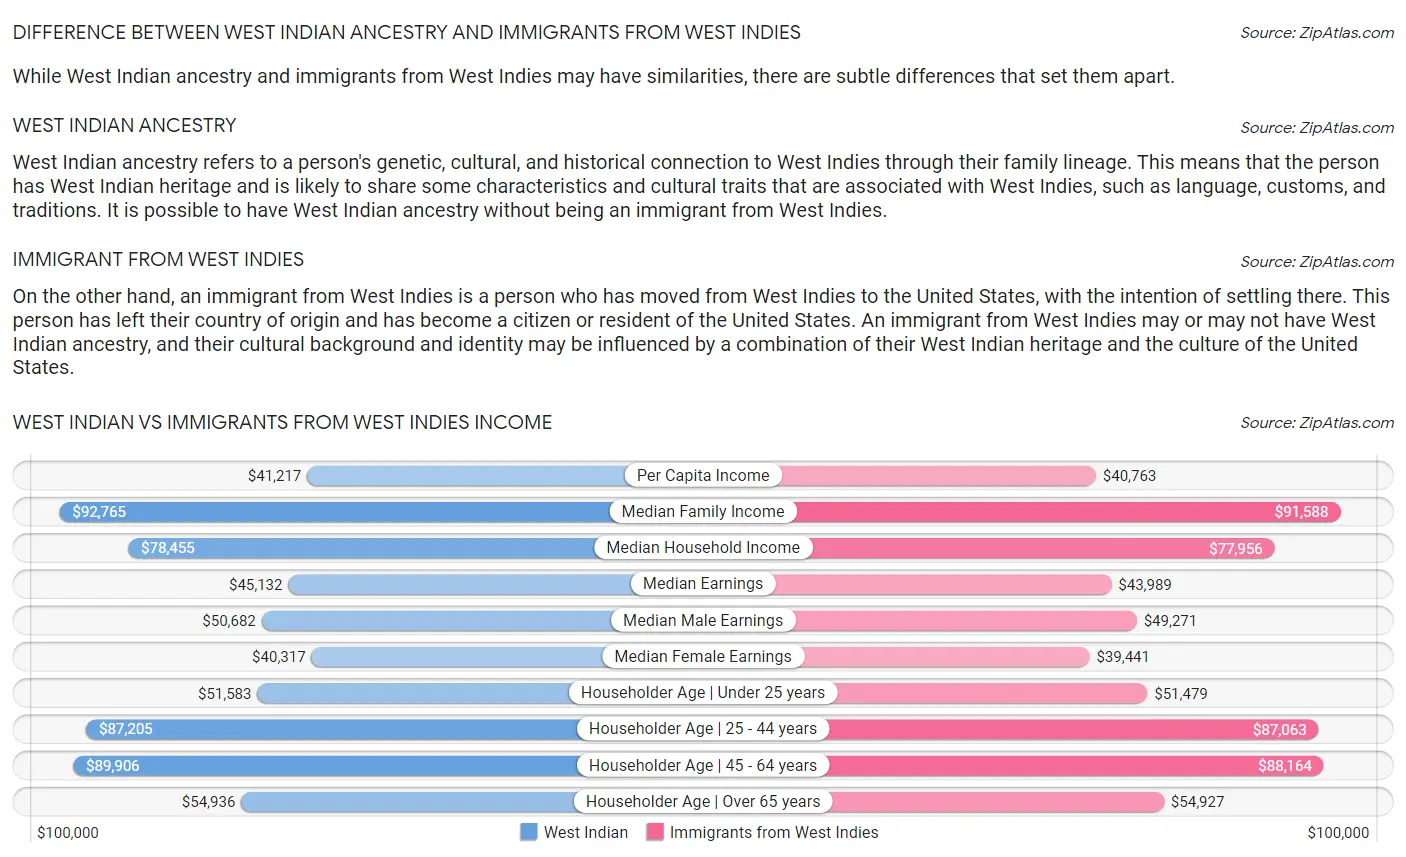 West Indian vs Immigrants from West Indies Income